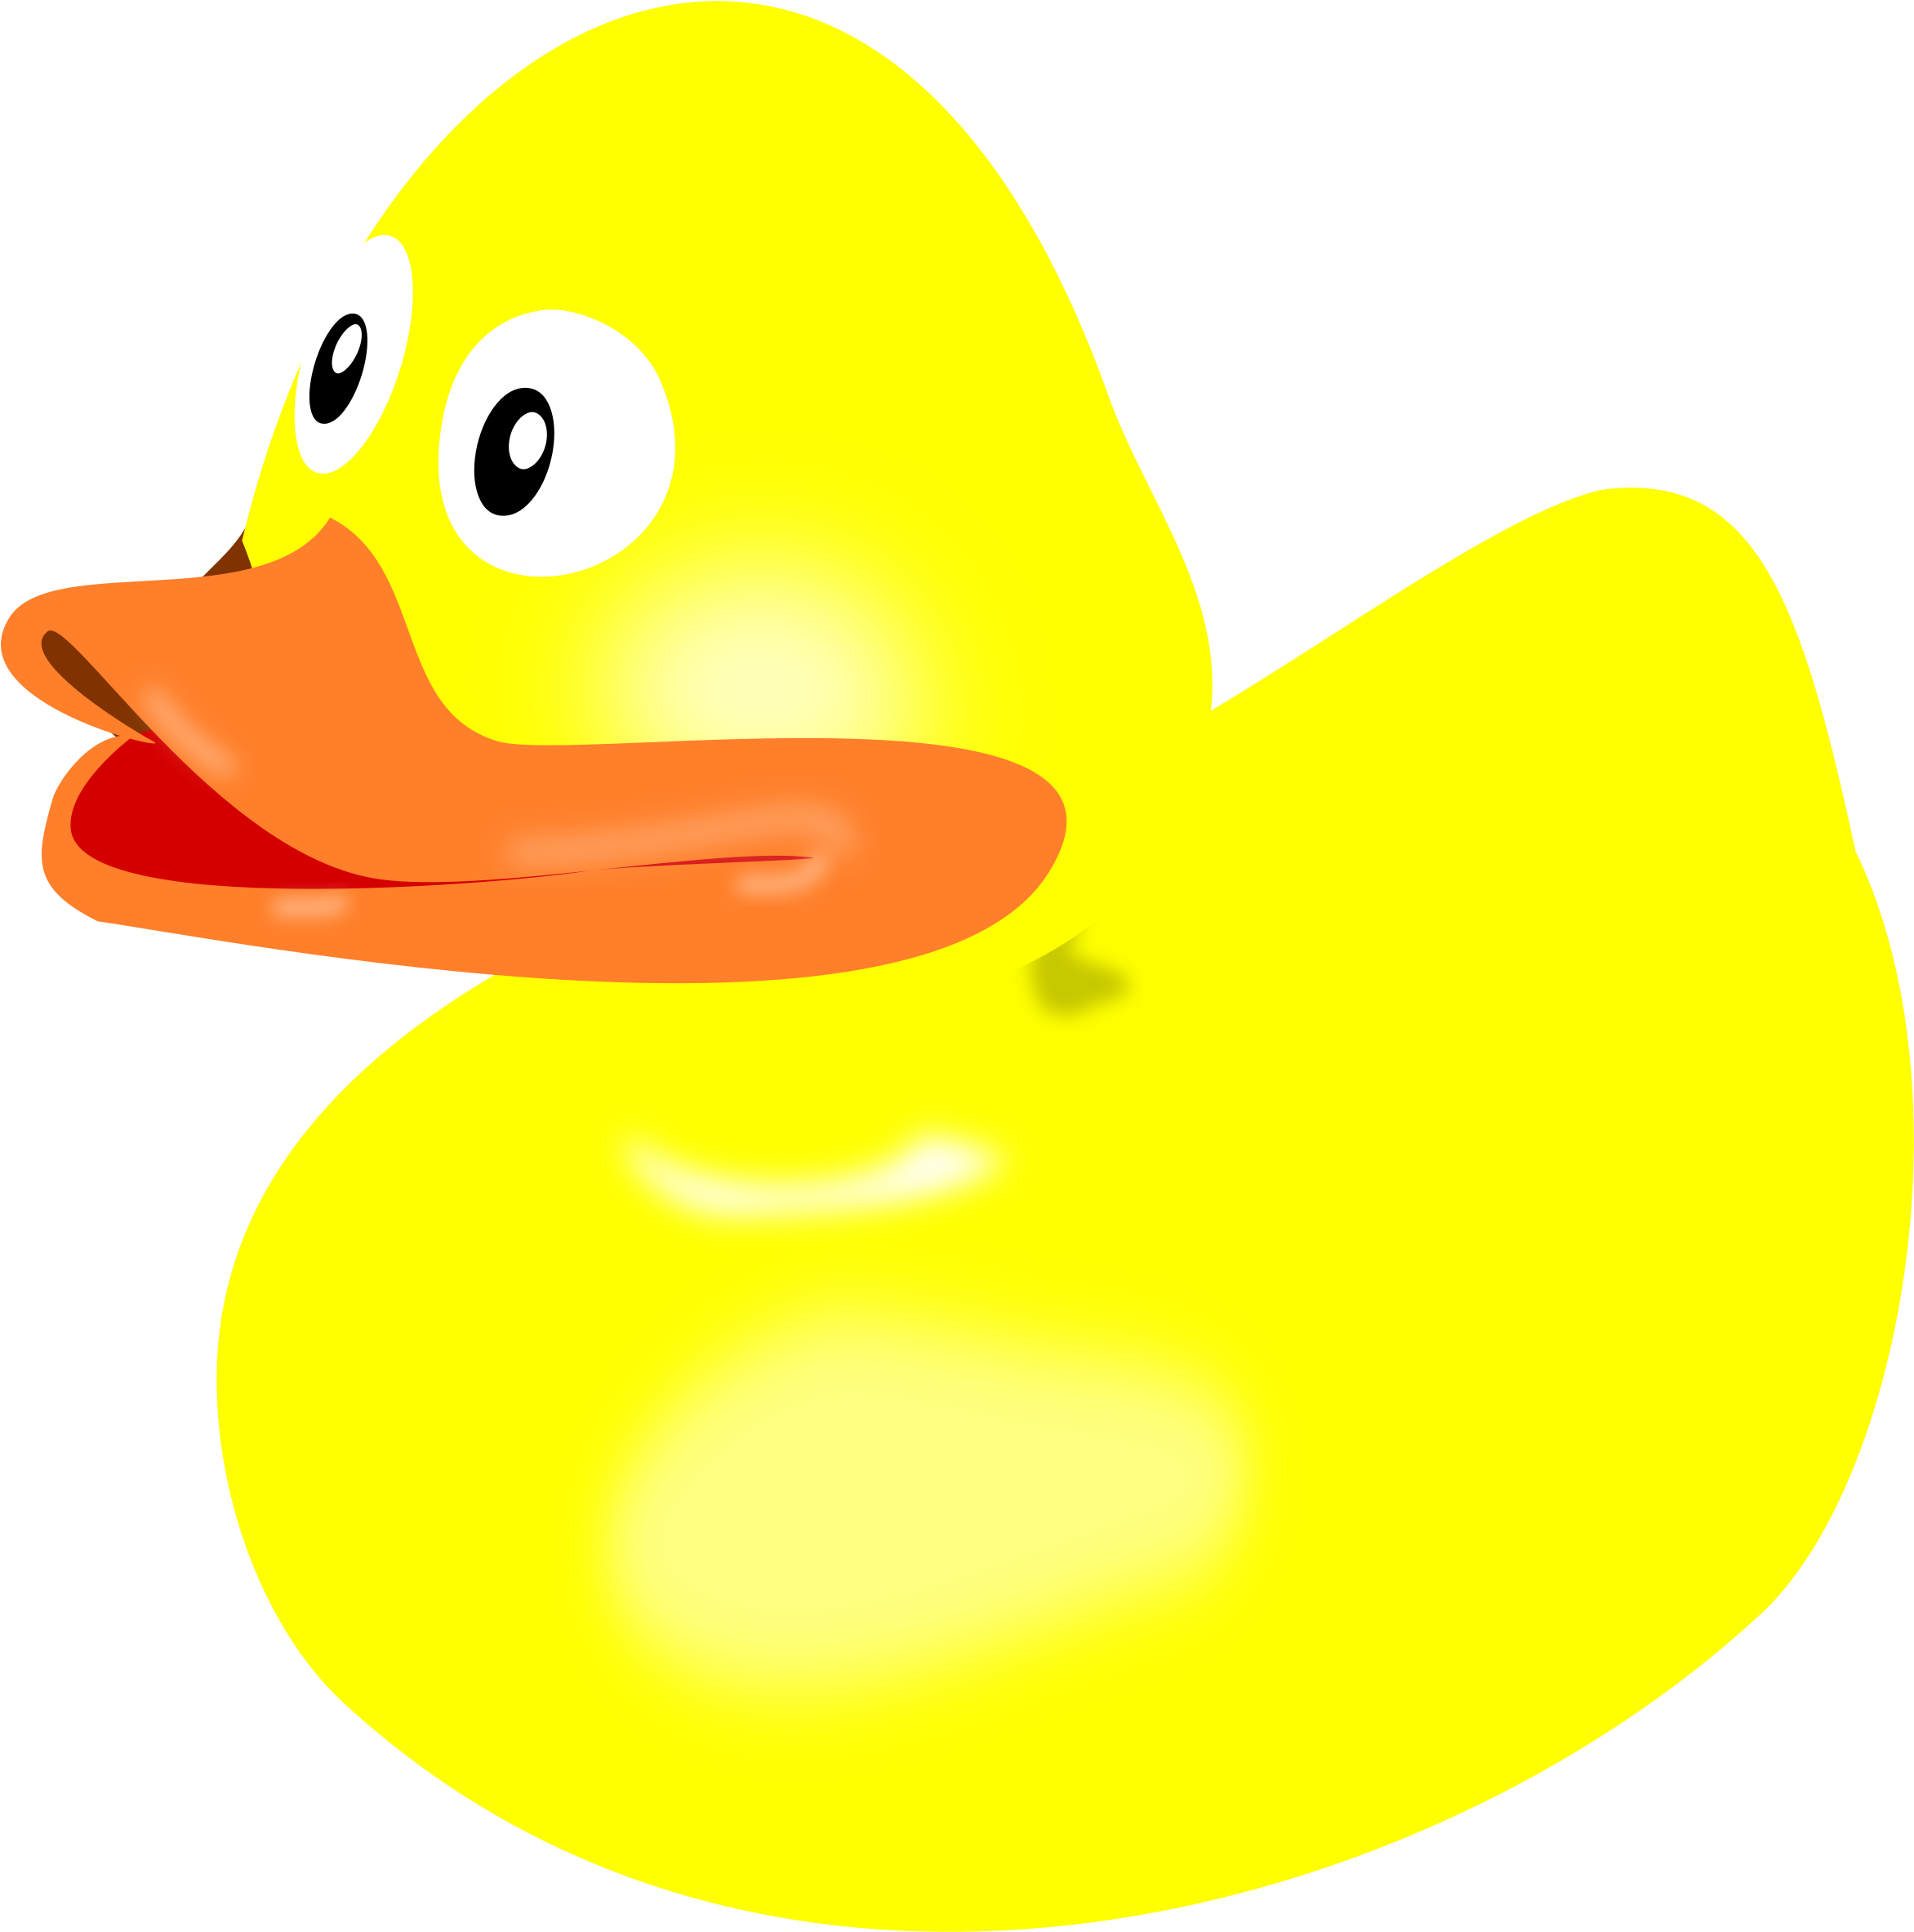 Rubber Duck PNG Image HD